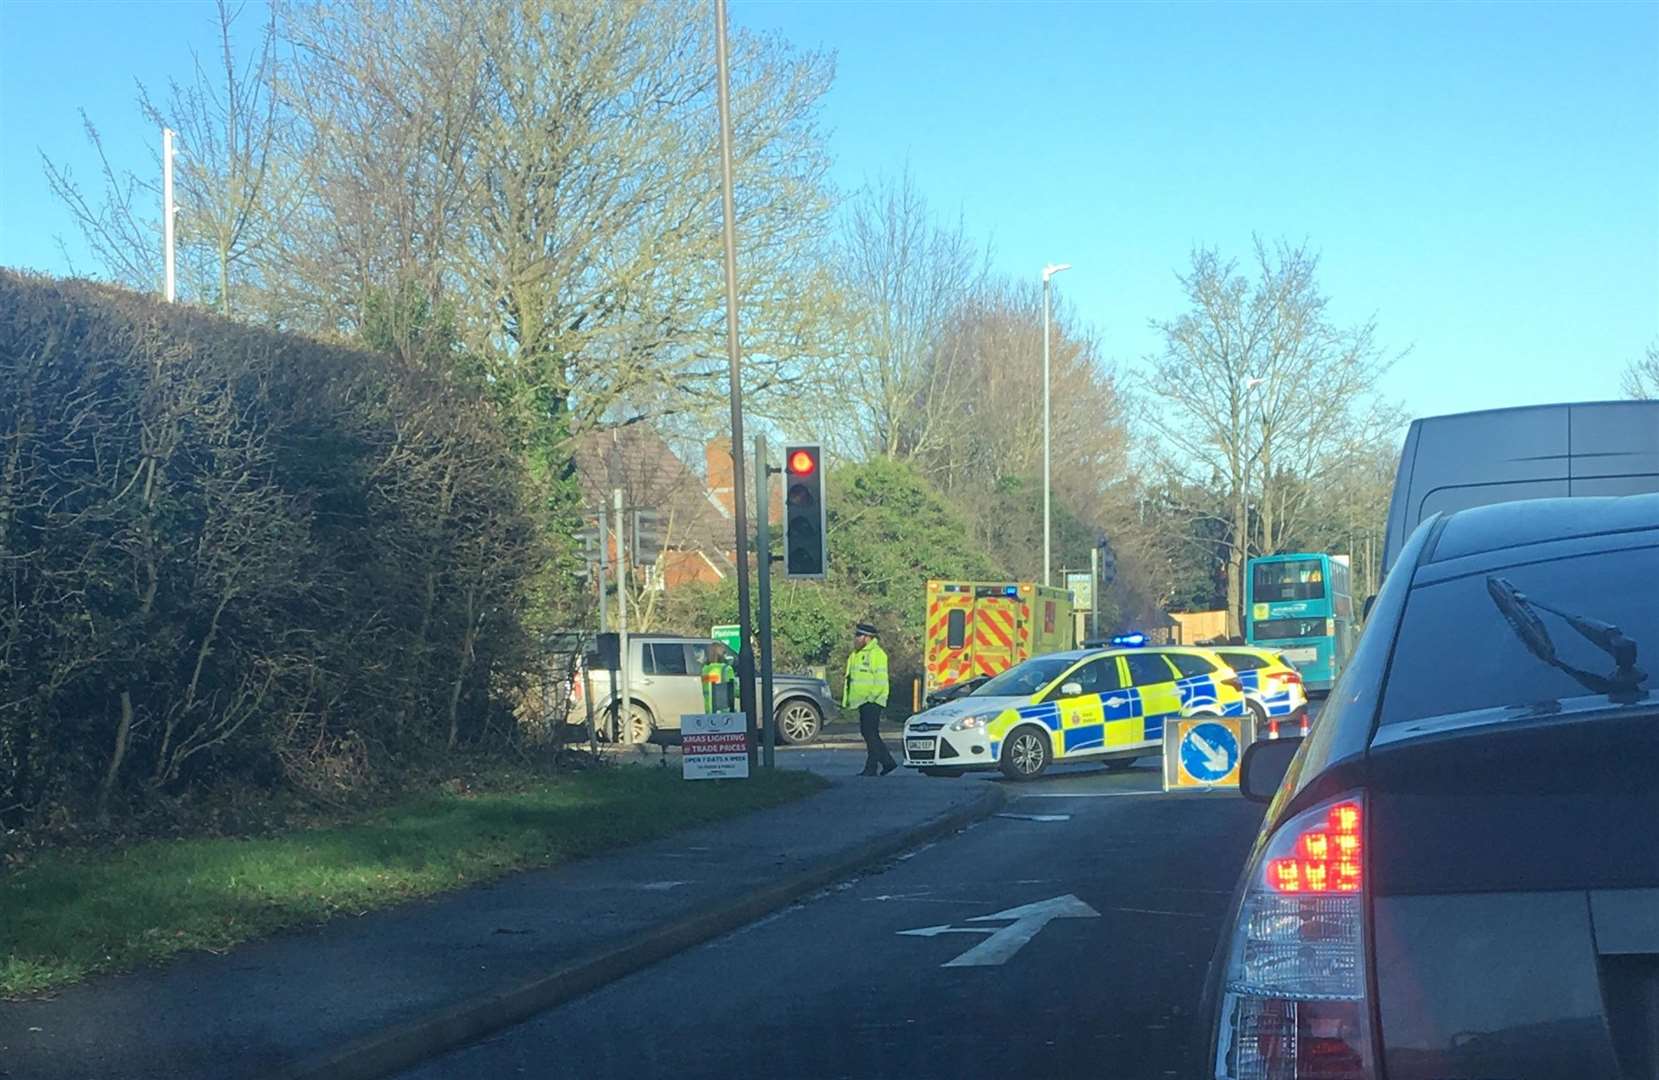 Drivers are being told to expect delays when approaching the Linton crossroads